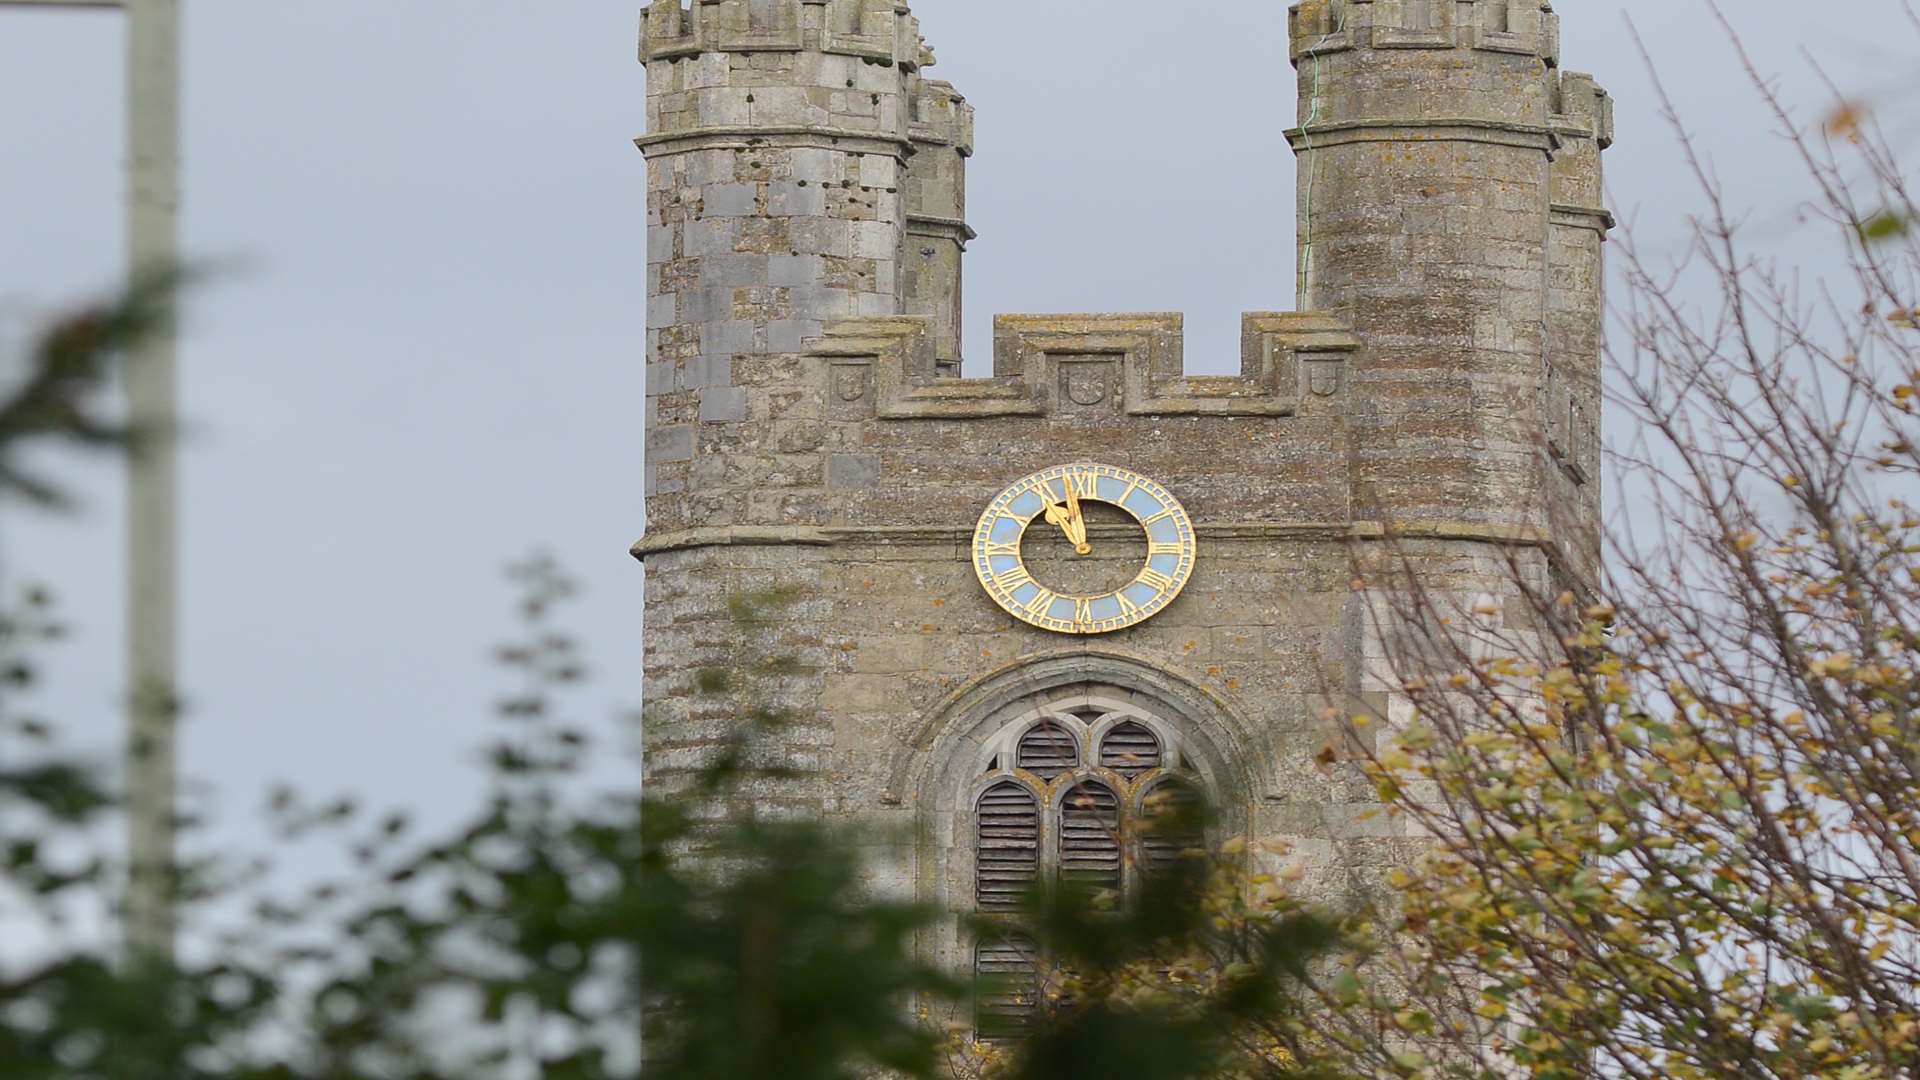 The clock at St Mary's is visible from the memorial gardens